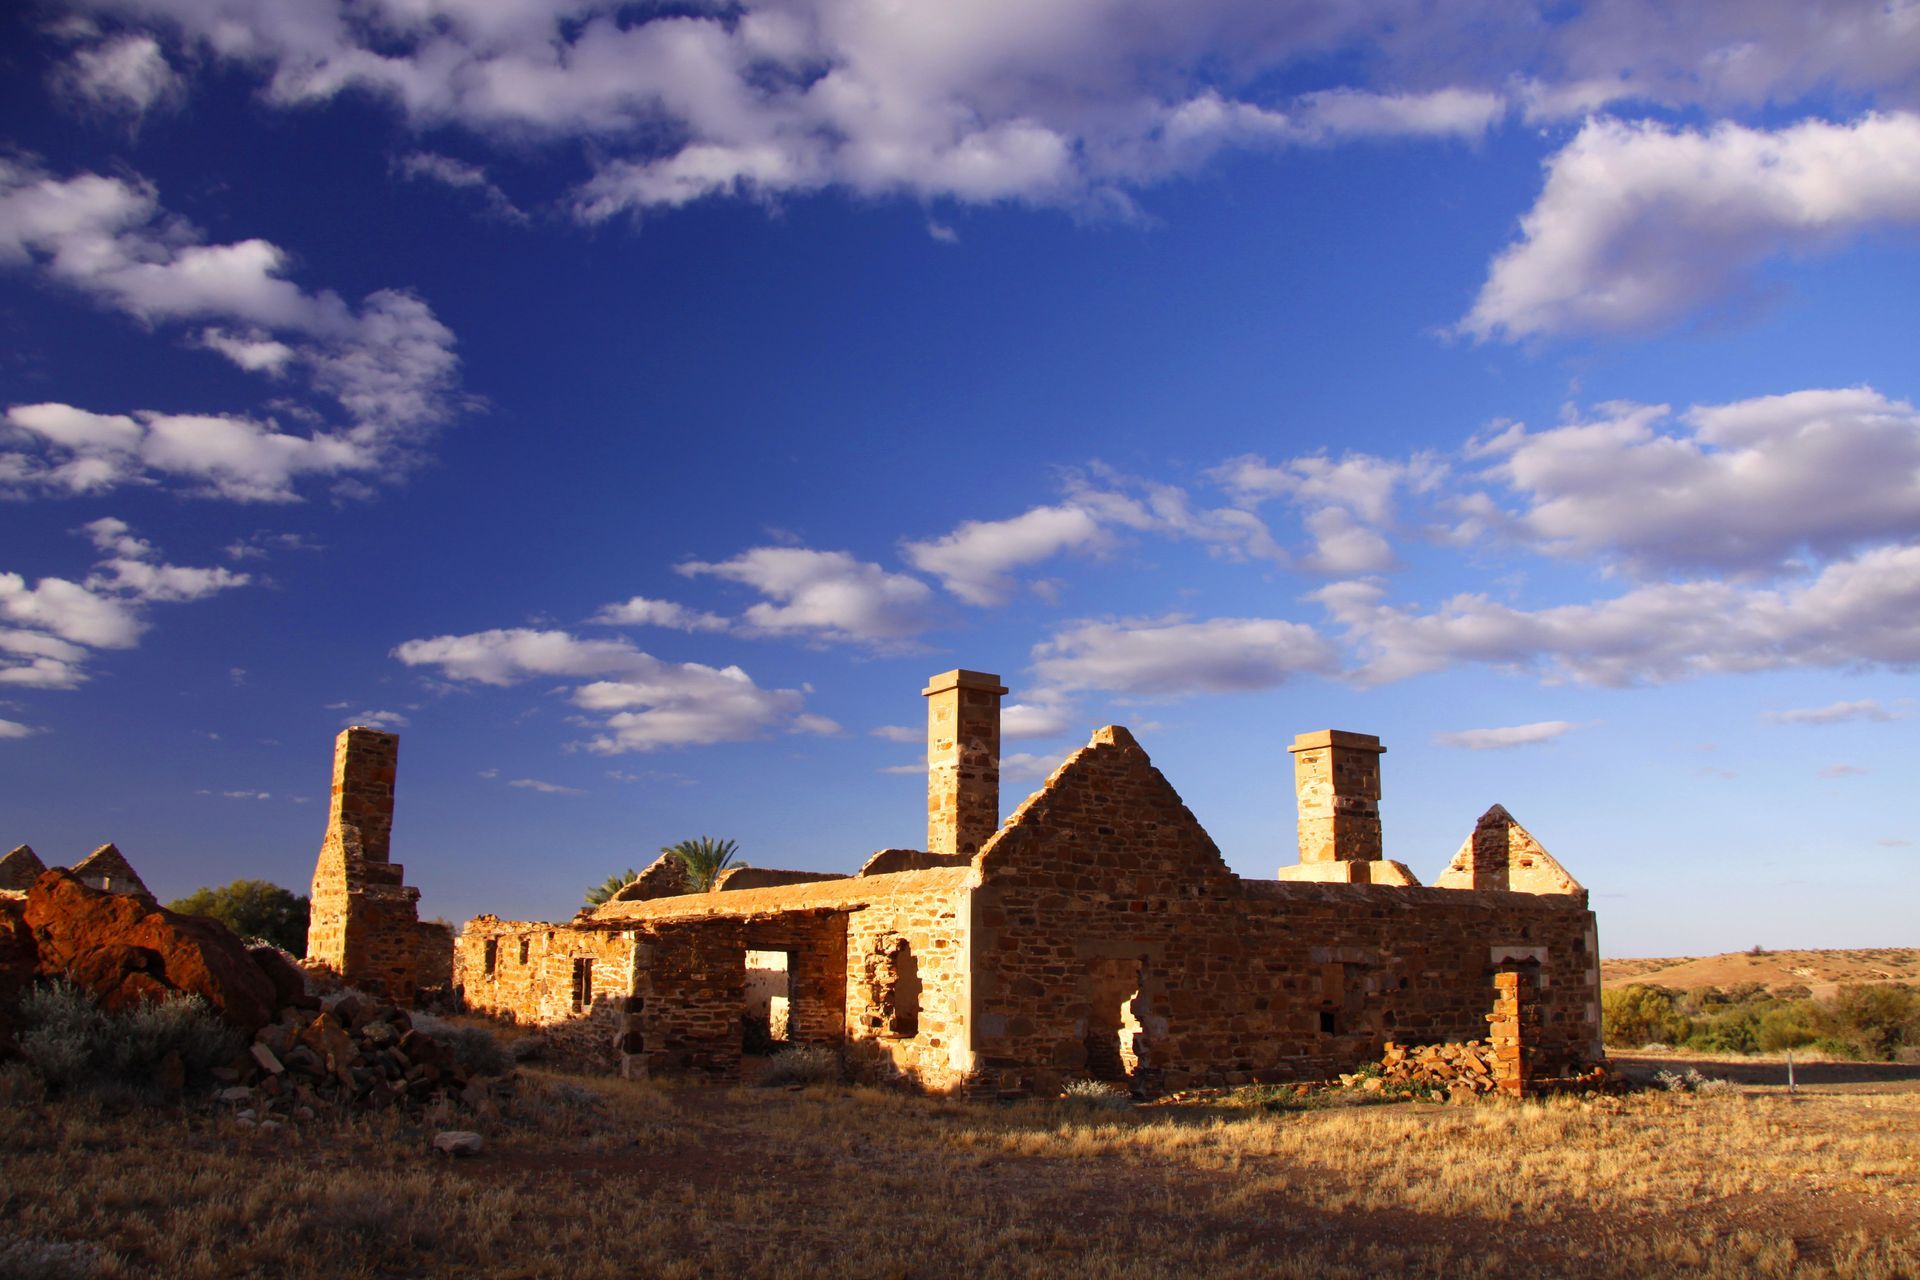 Abandoned buildings in the Australian Outback. The buildings are made of sandstone and are in various states of disrepair. The buildings are surrounded by desert landscape.